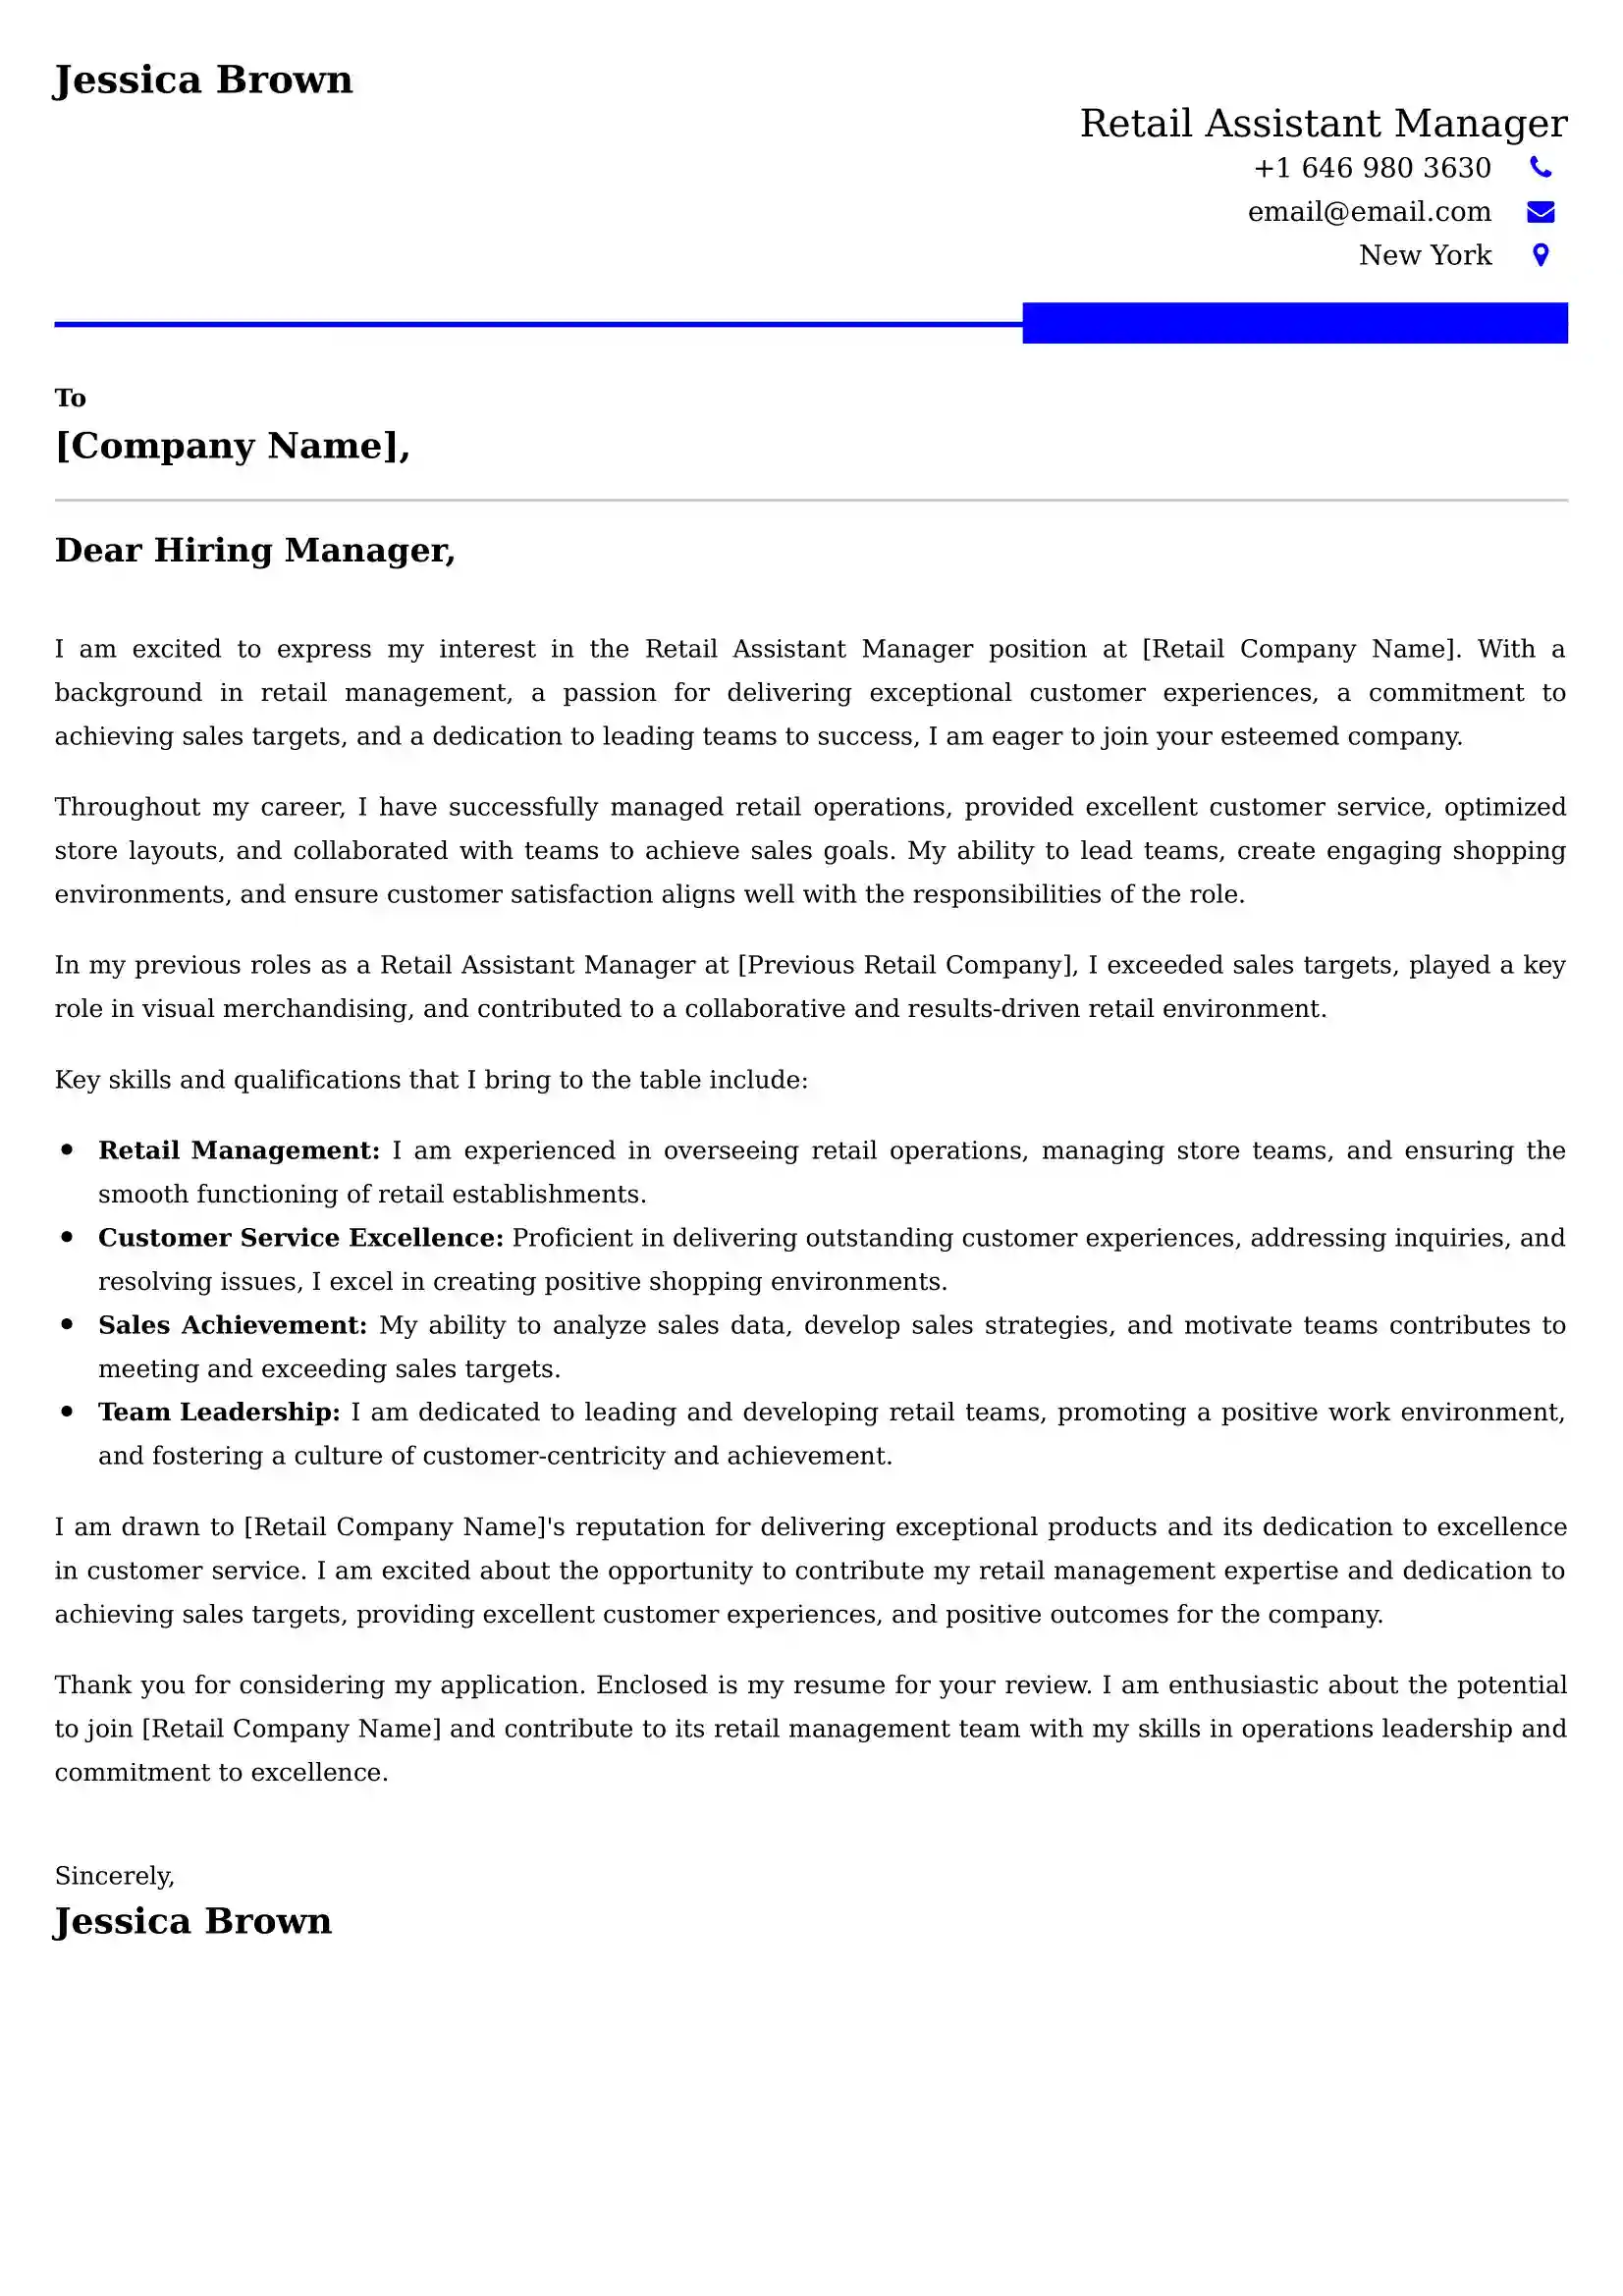 Retail Assistant Manager Cover Letter Examples for UK 